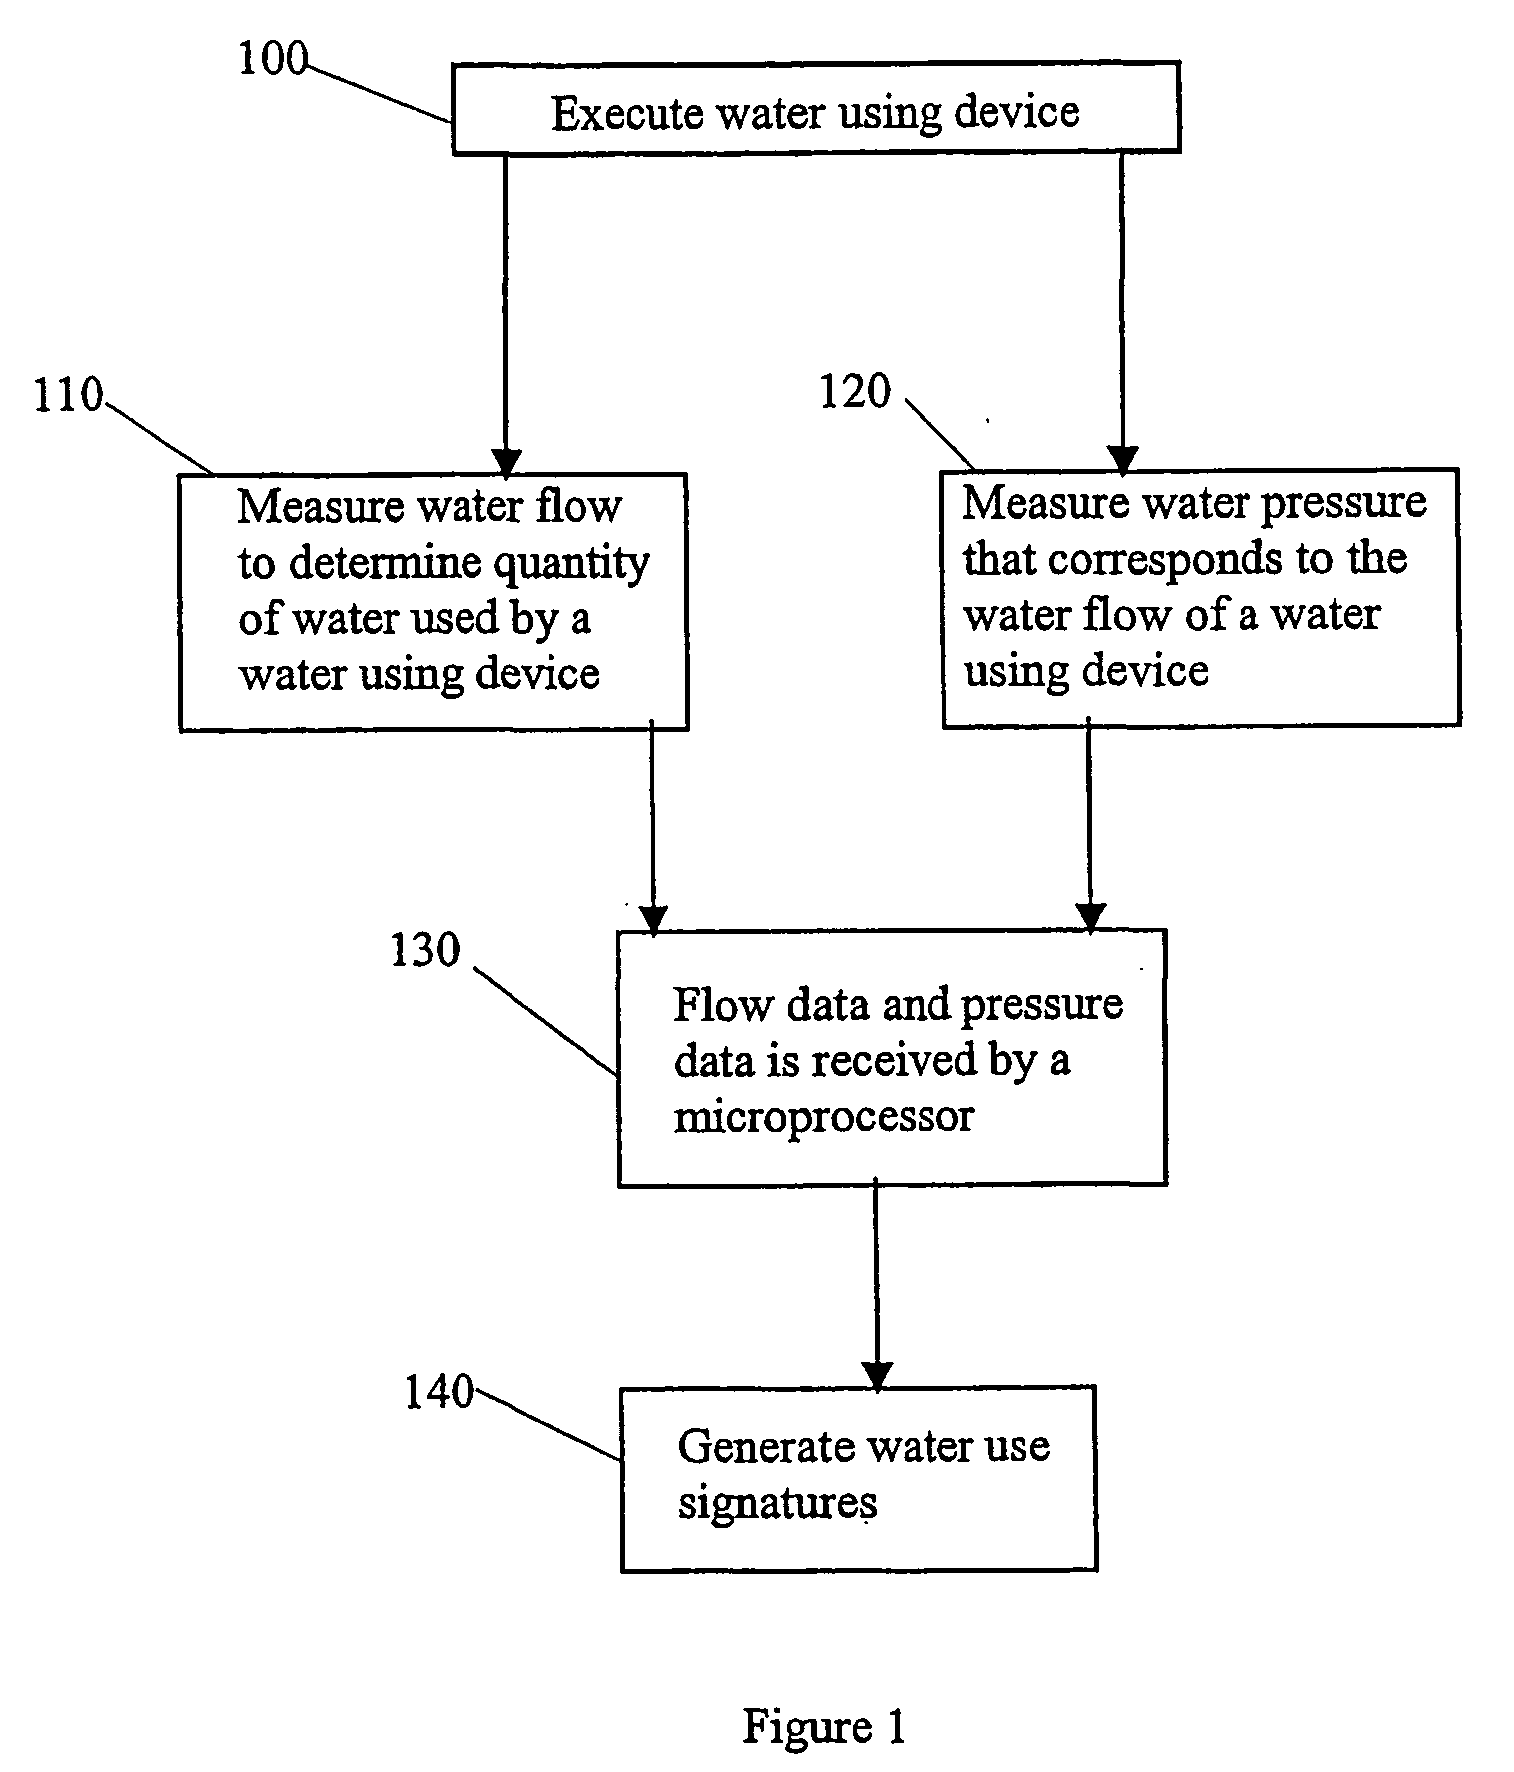 Methods and apparatus for using water use signatures and water pressure in improving water use efficiency